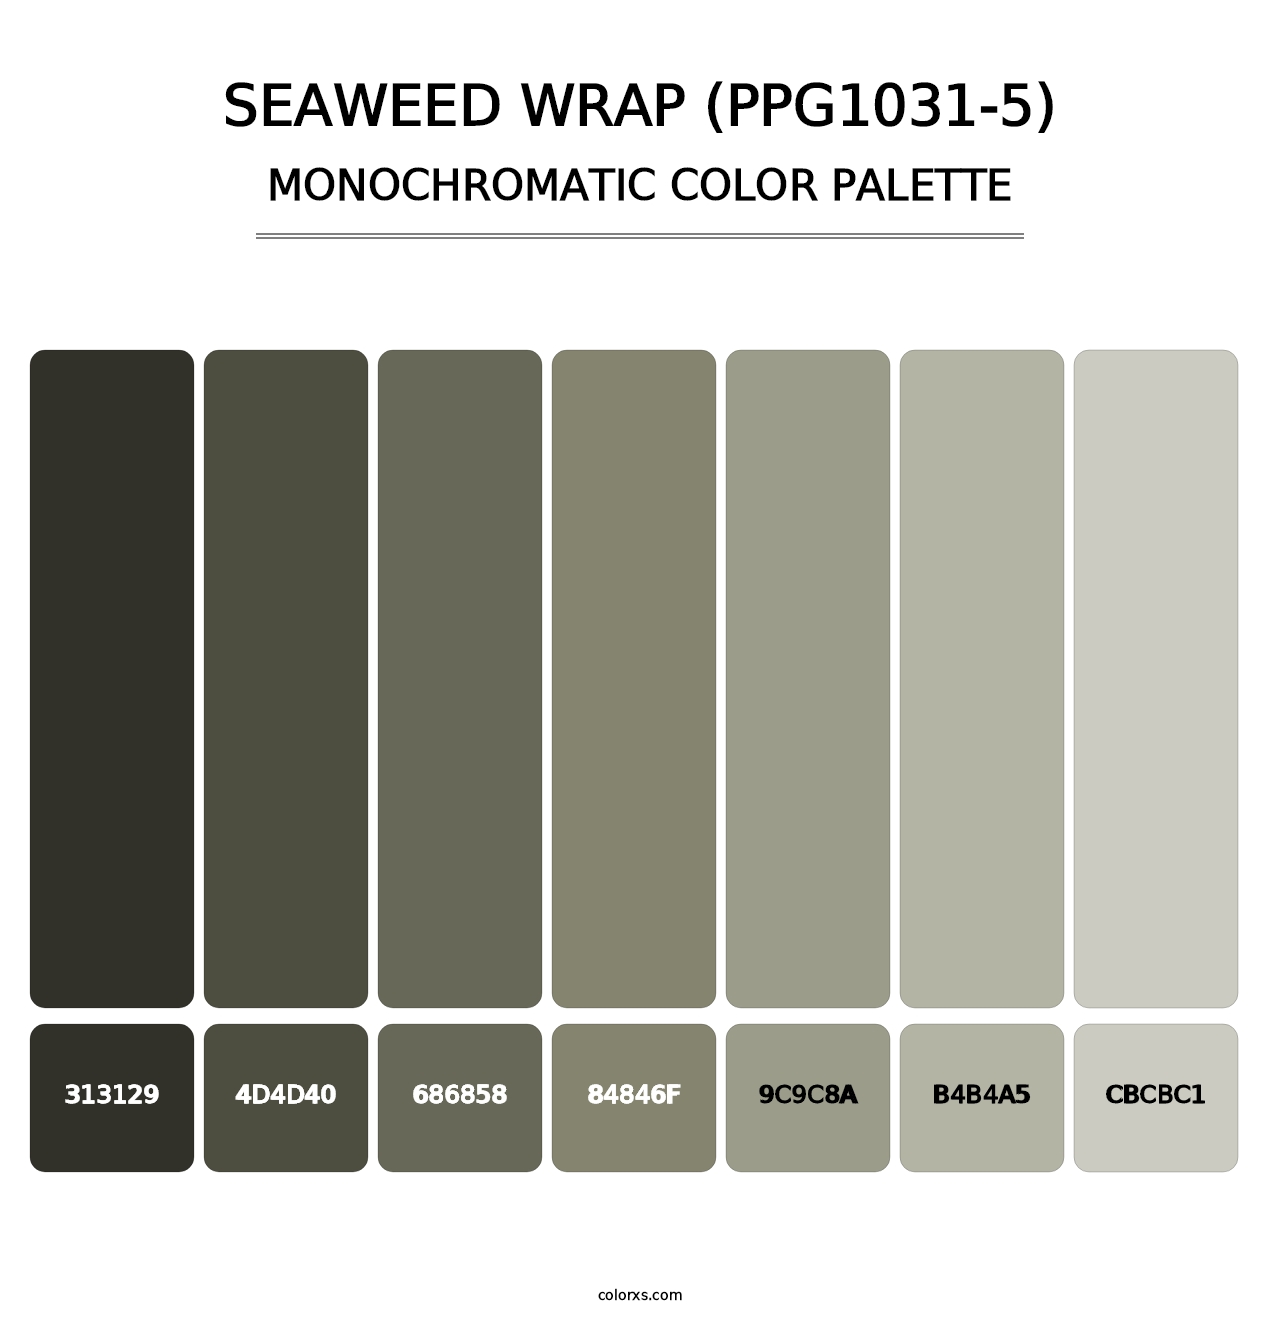 Seaweed Wrap (PPG1031-5) - Monochromatic Color Palette